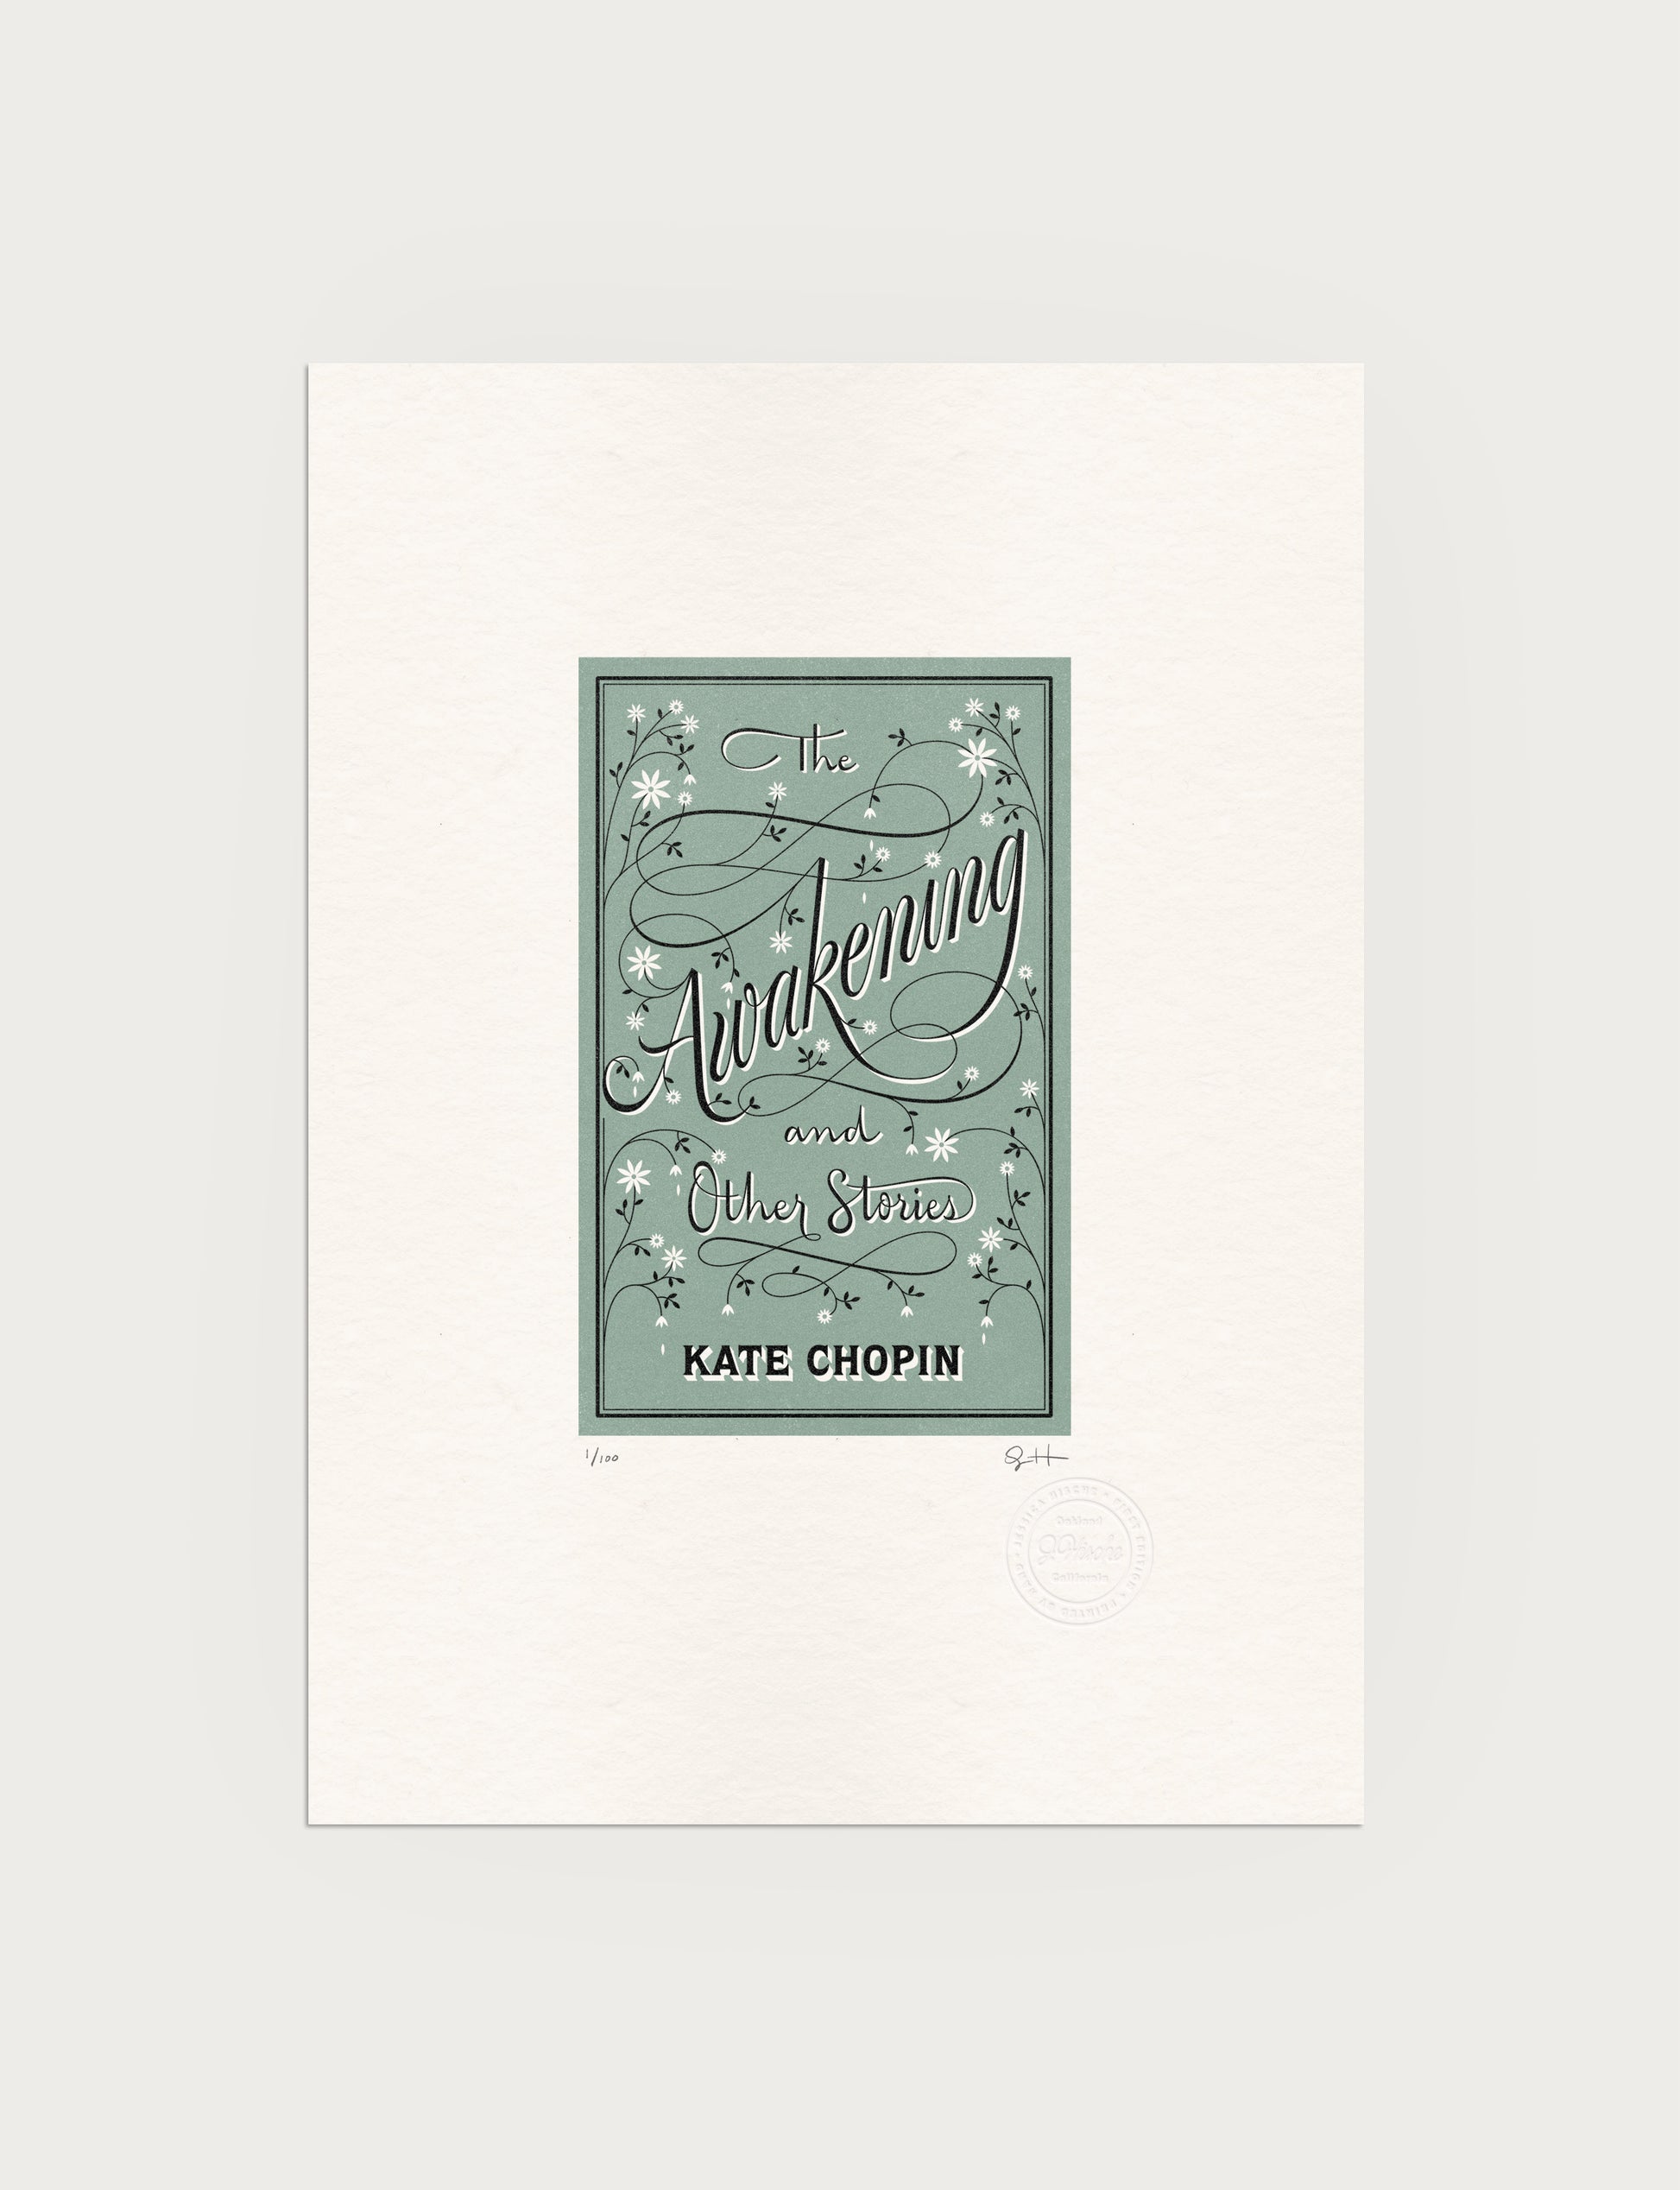 2-color letterpress print in green and black. Printed artwork is an illustrated book cover of The Adventures of The Awakening including custom hand lettering.